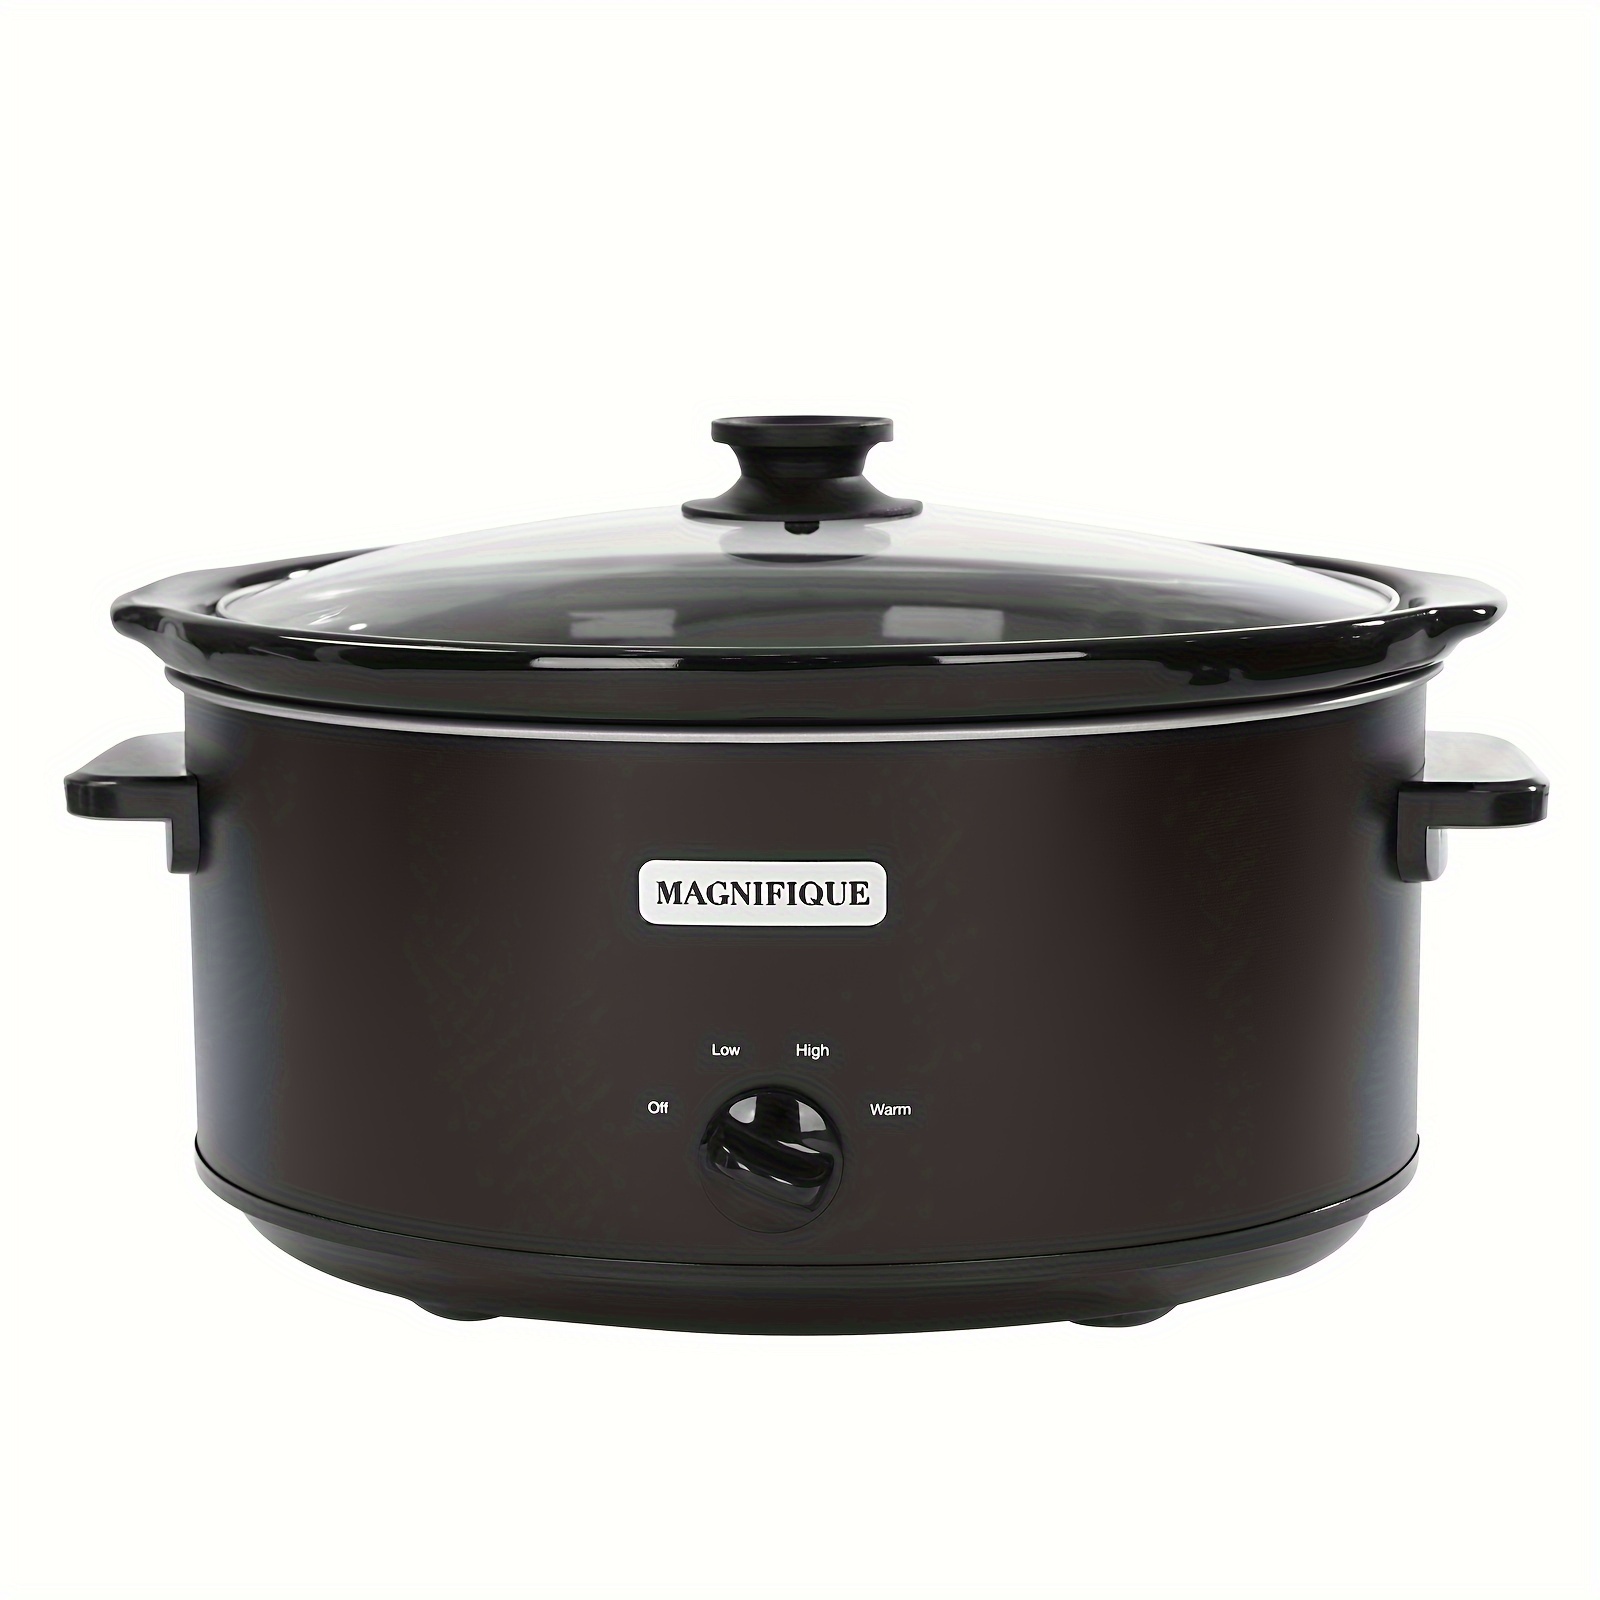 

Magnifique 8 Quart Slow Cooker Oval Manual Pot Food Warmer With 3 Cooking Settings, Black Stainless Steel